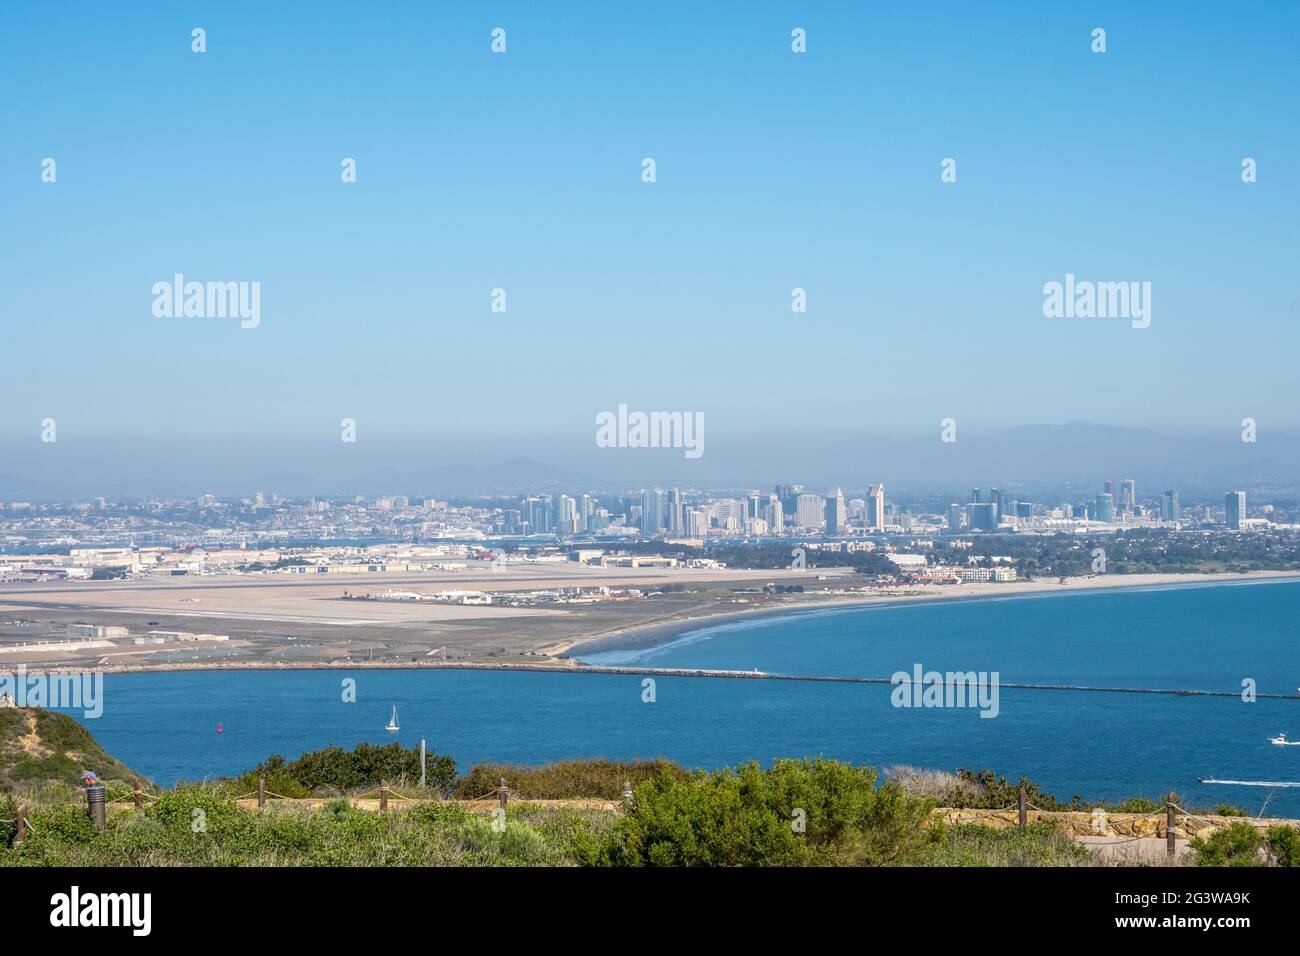 A breathtaking view of the San Diego Bay in California Stock Photo